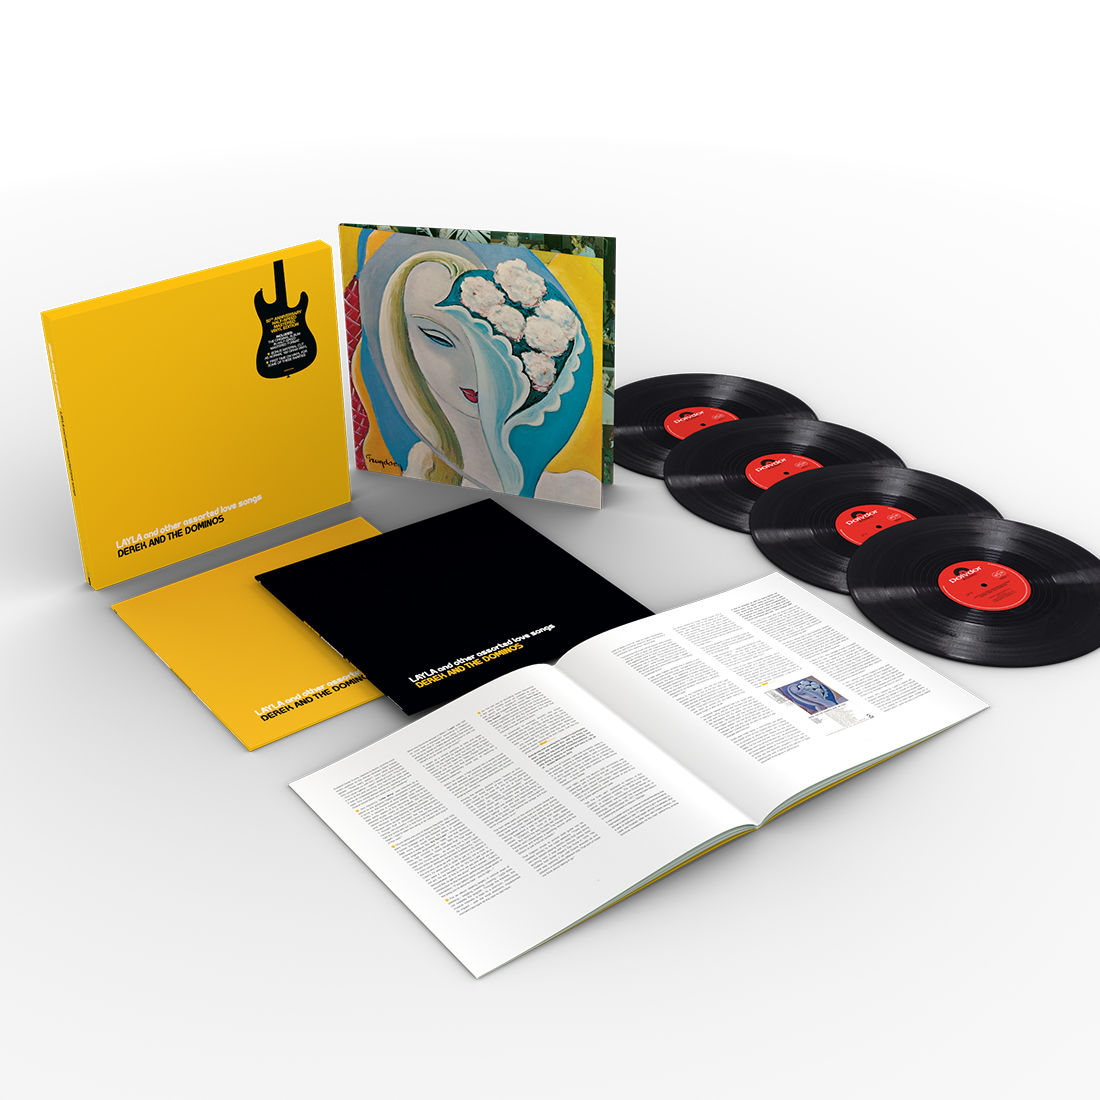 Derek & The Dominos - Layla And Other Assorted Love Songs (50th Anniversary Edition): Vinyl 4LP Box Set